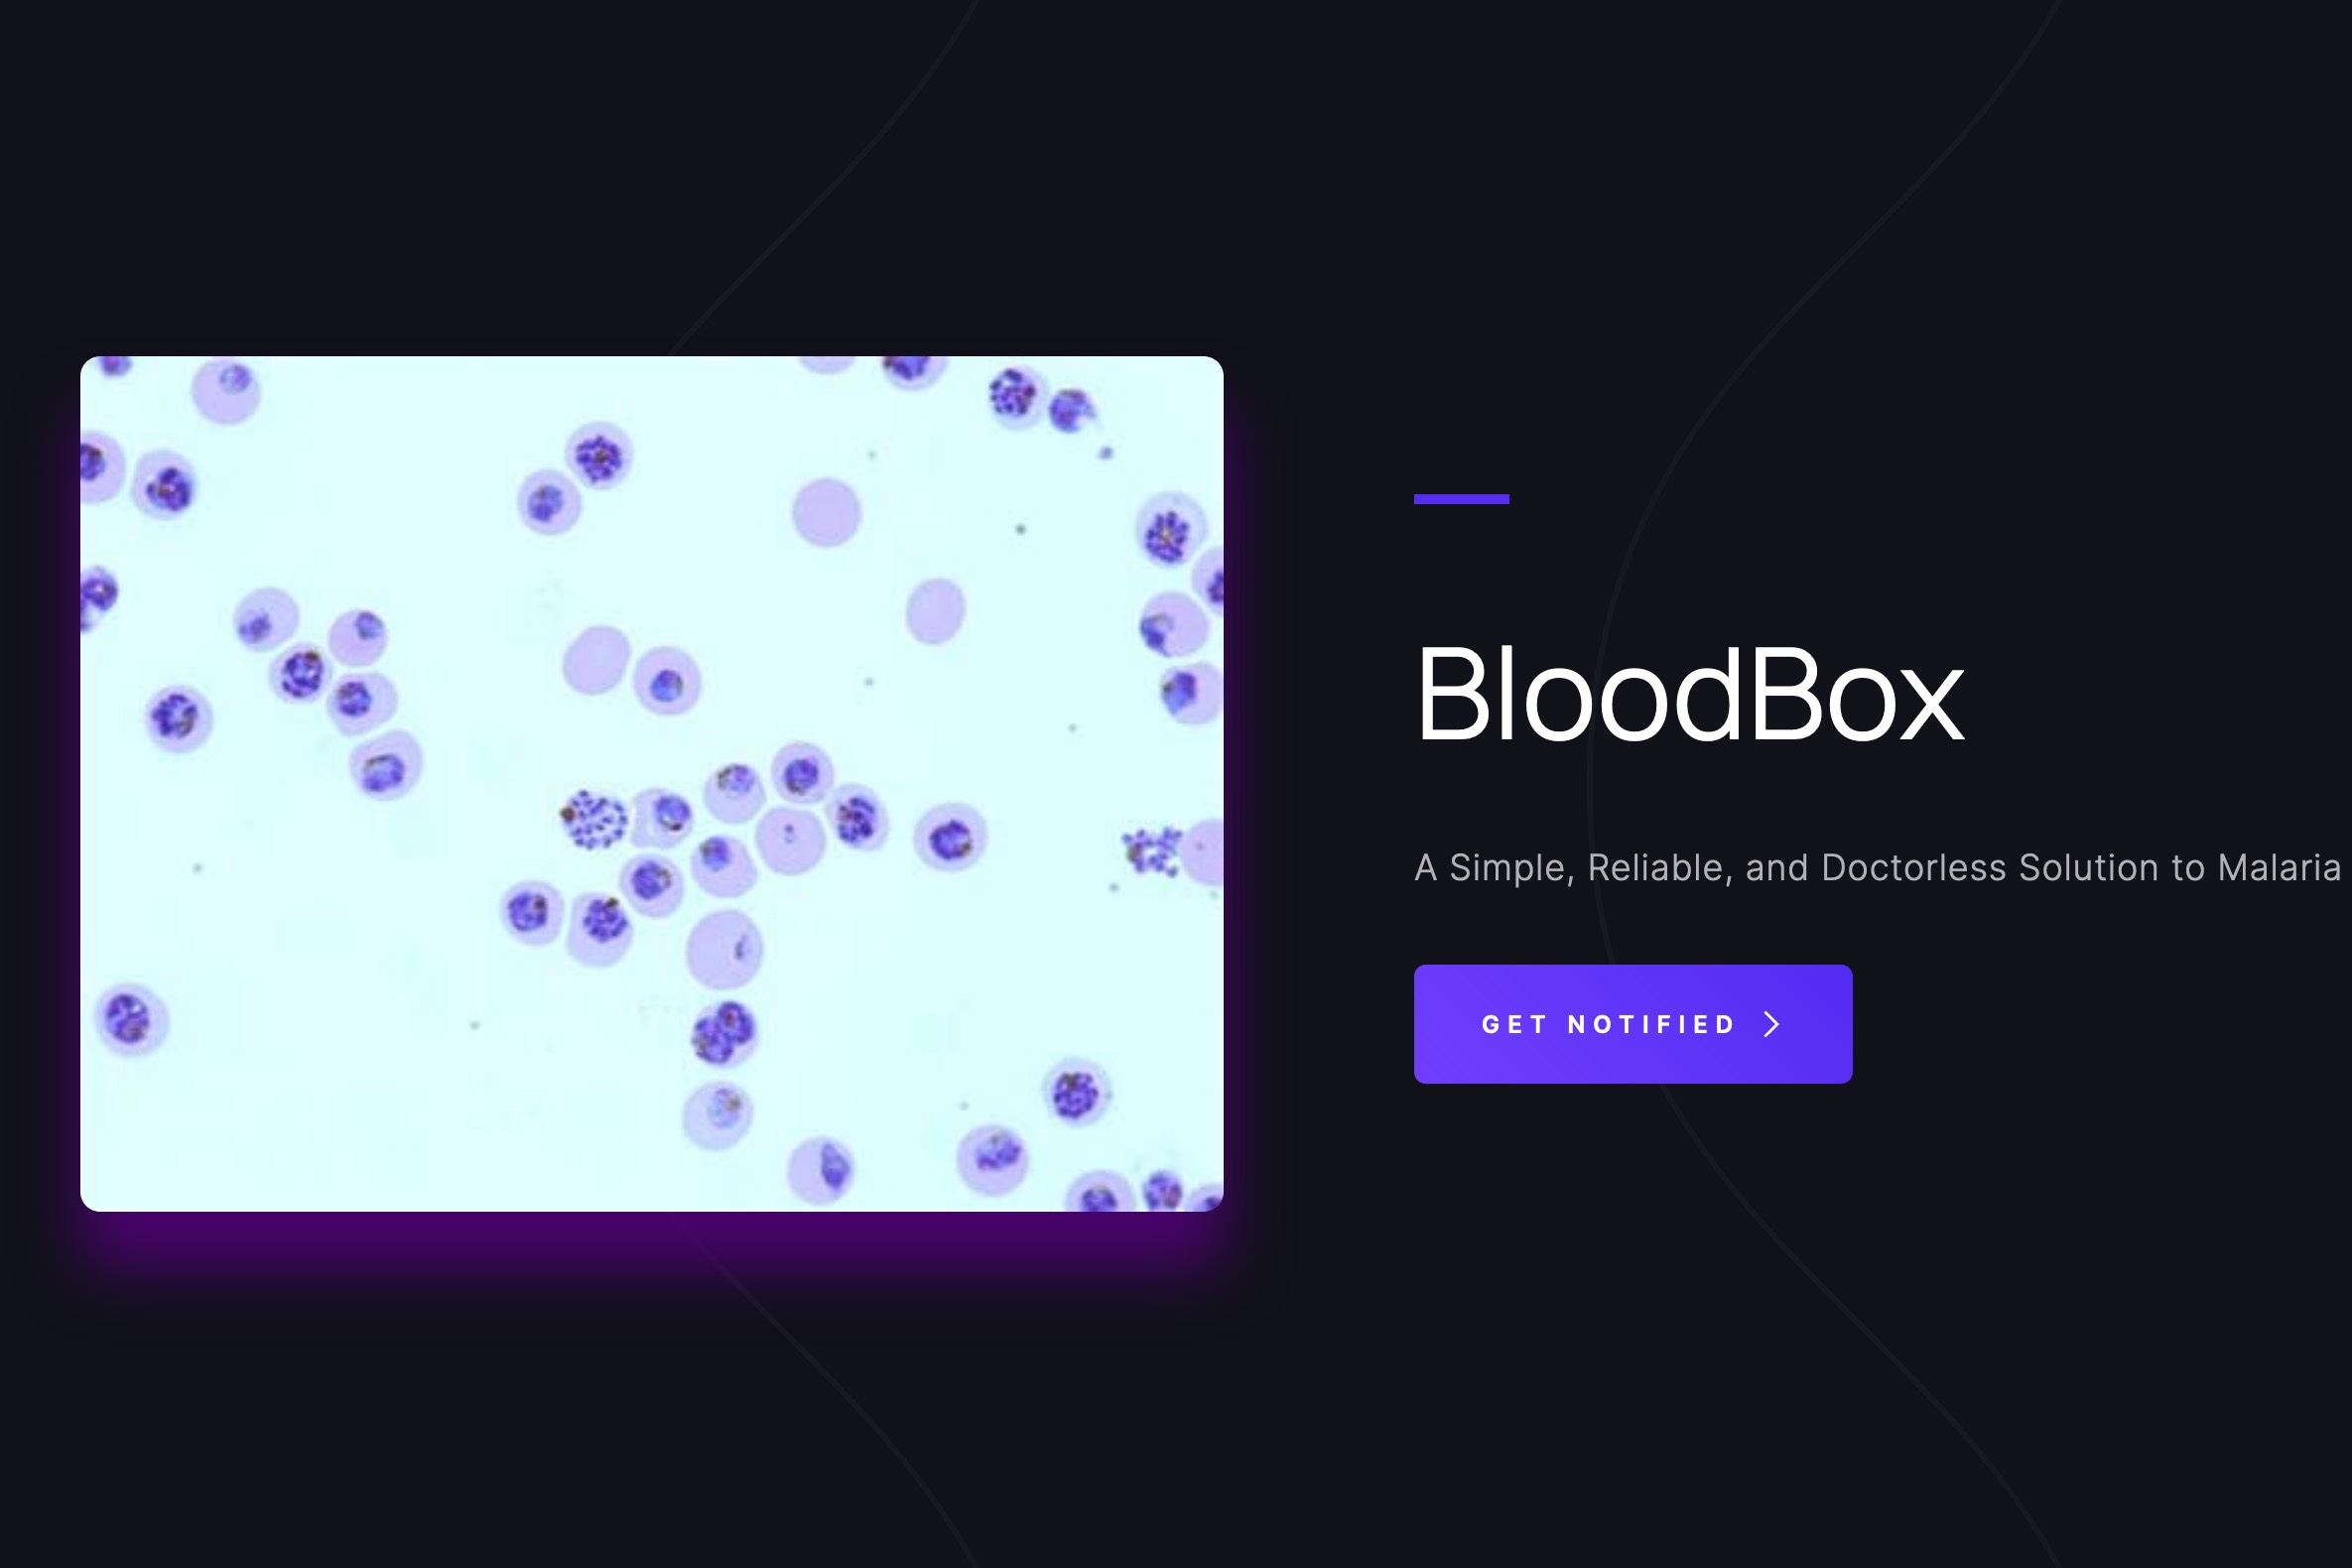 BloodBoximage